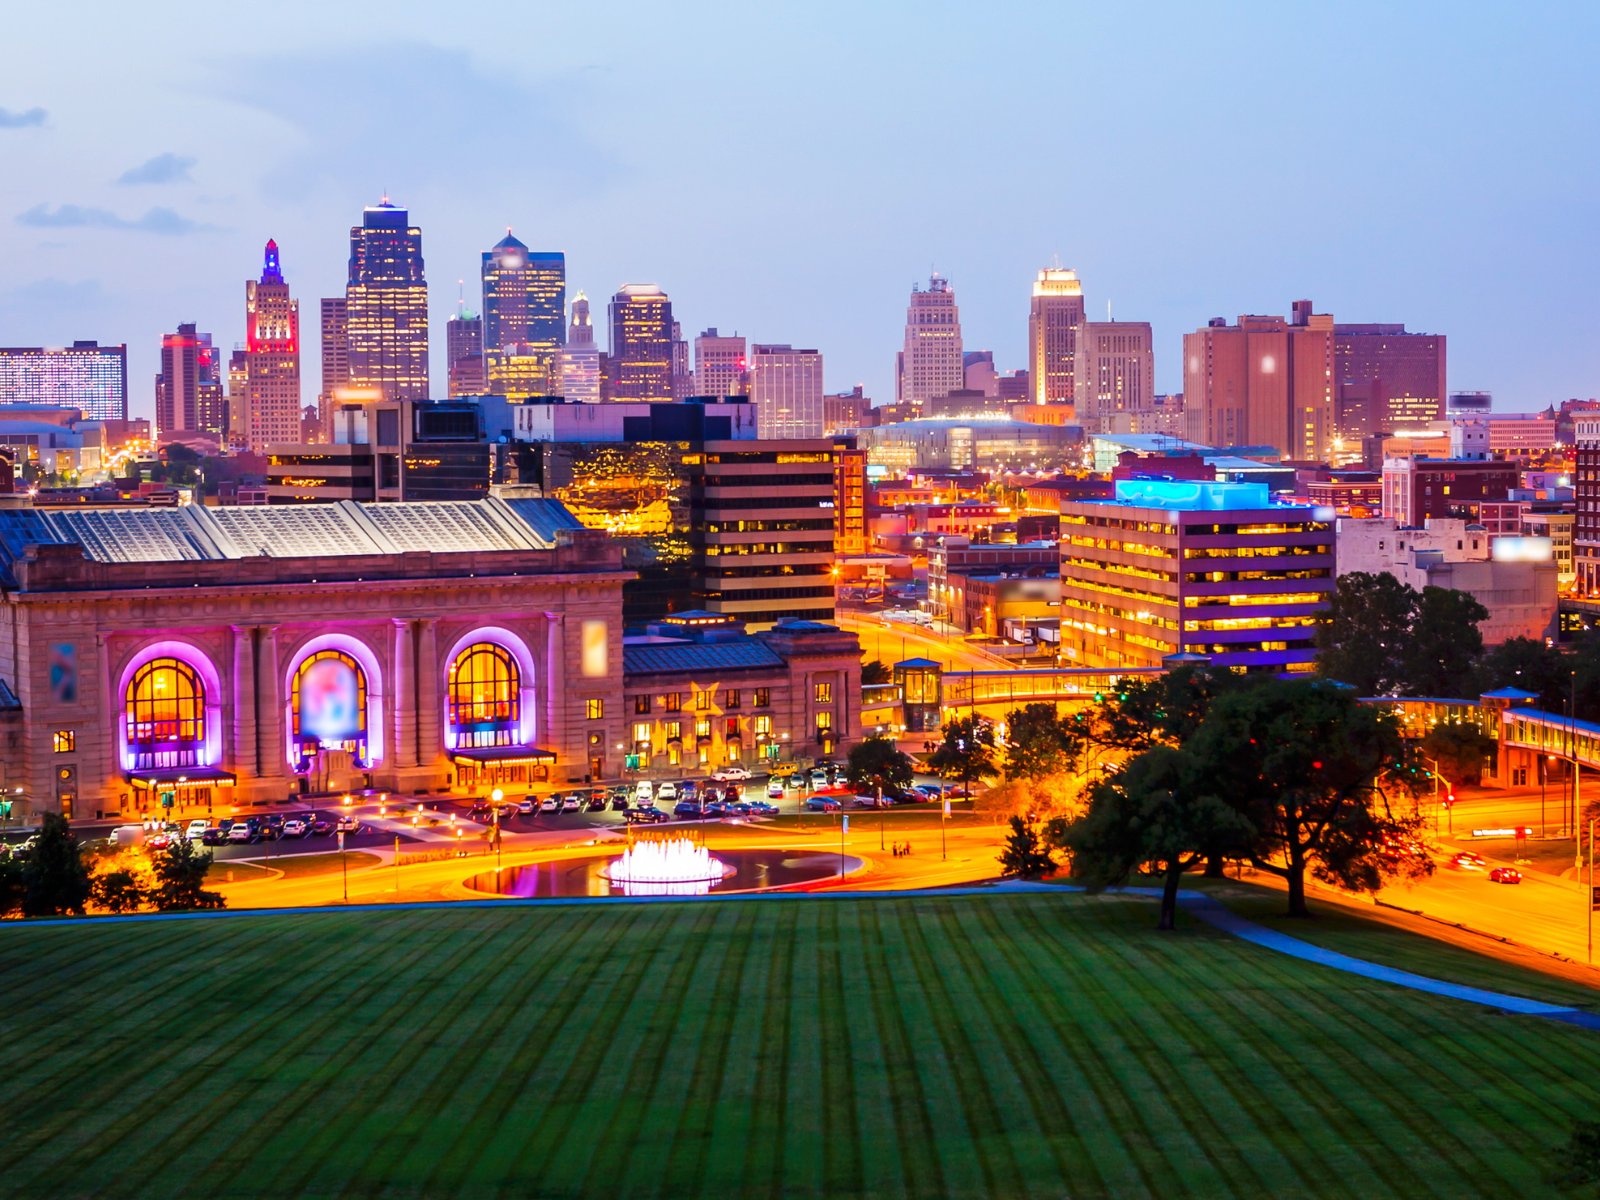 A view of Kansas City at night from the World War I Museum is a breathtaking way to experience the Kansas City ARVC show.